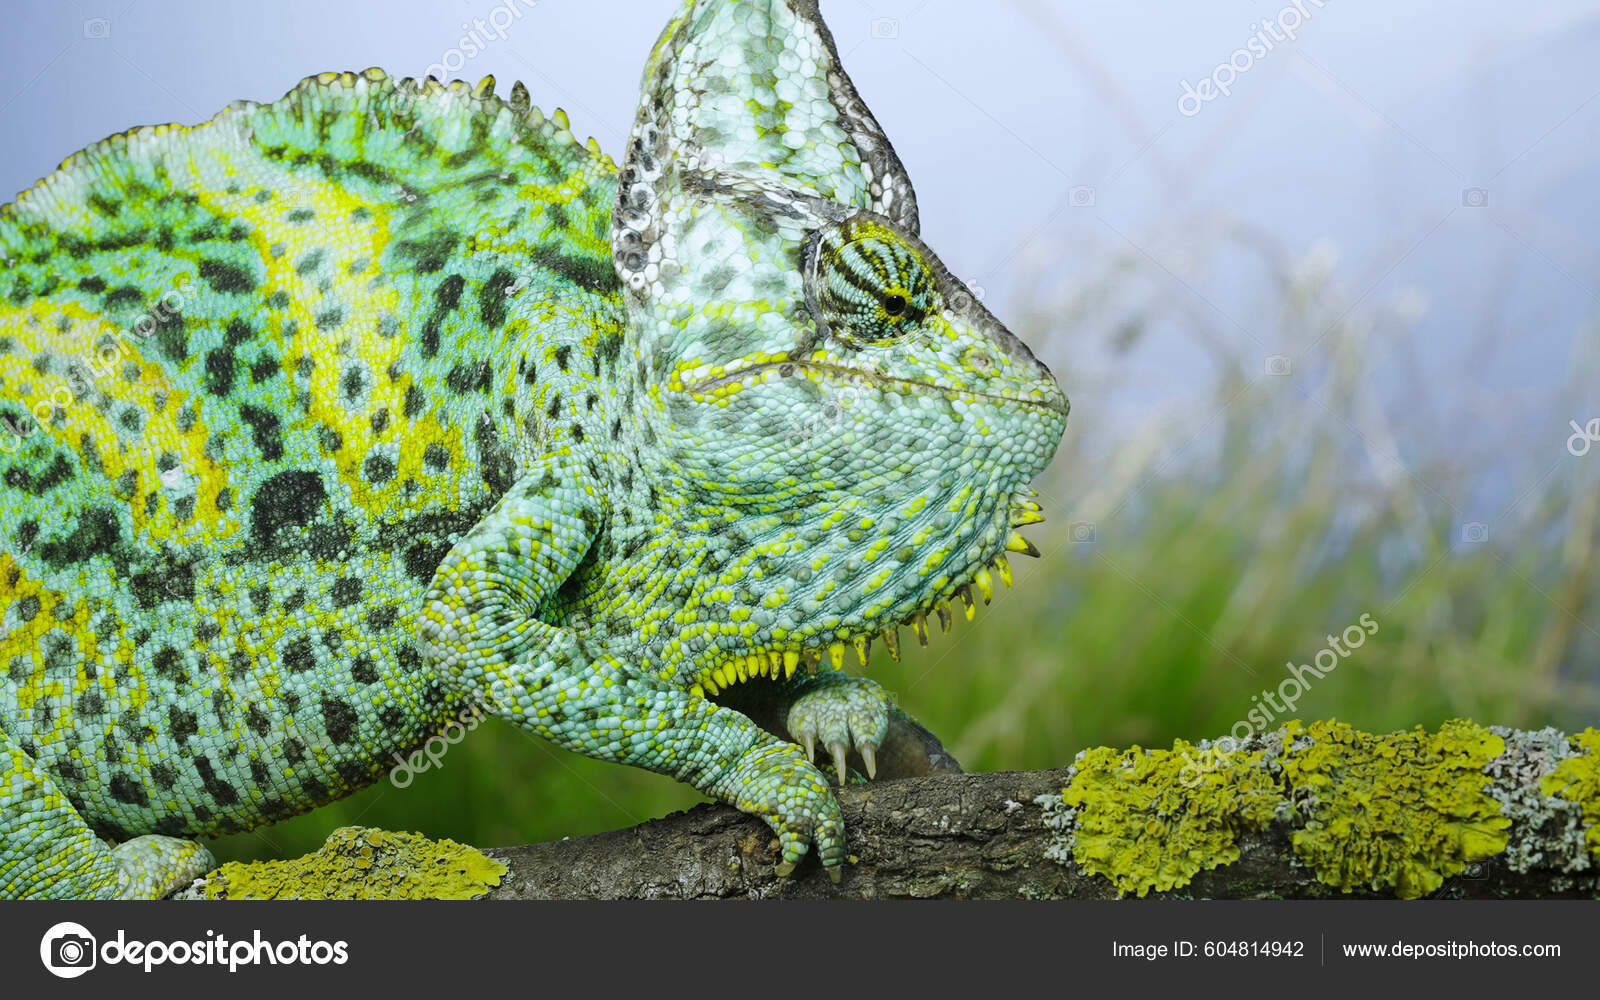 Designer Veiled chameleons for sale are the most colorful of all the  veileds.